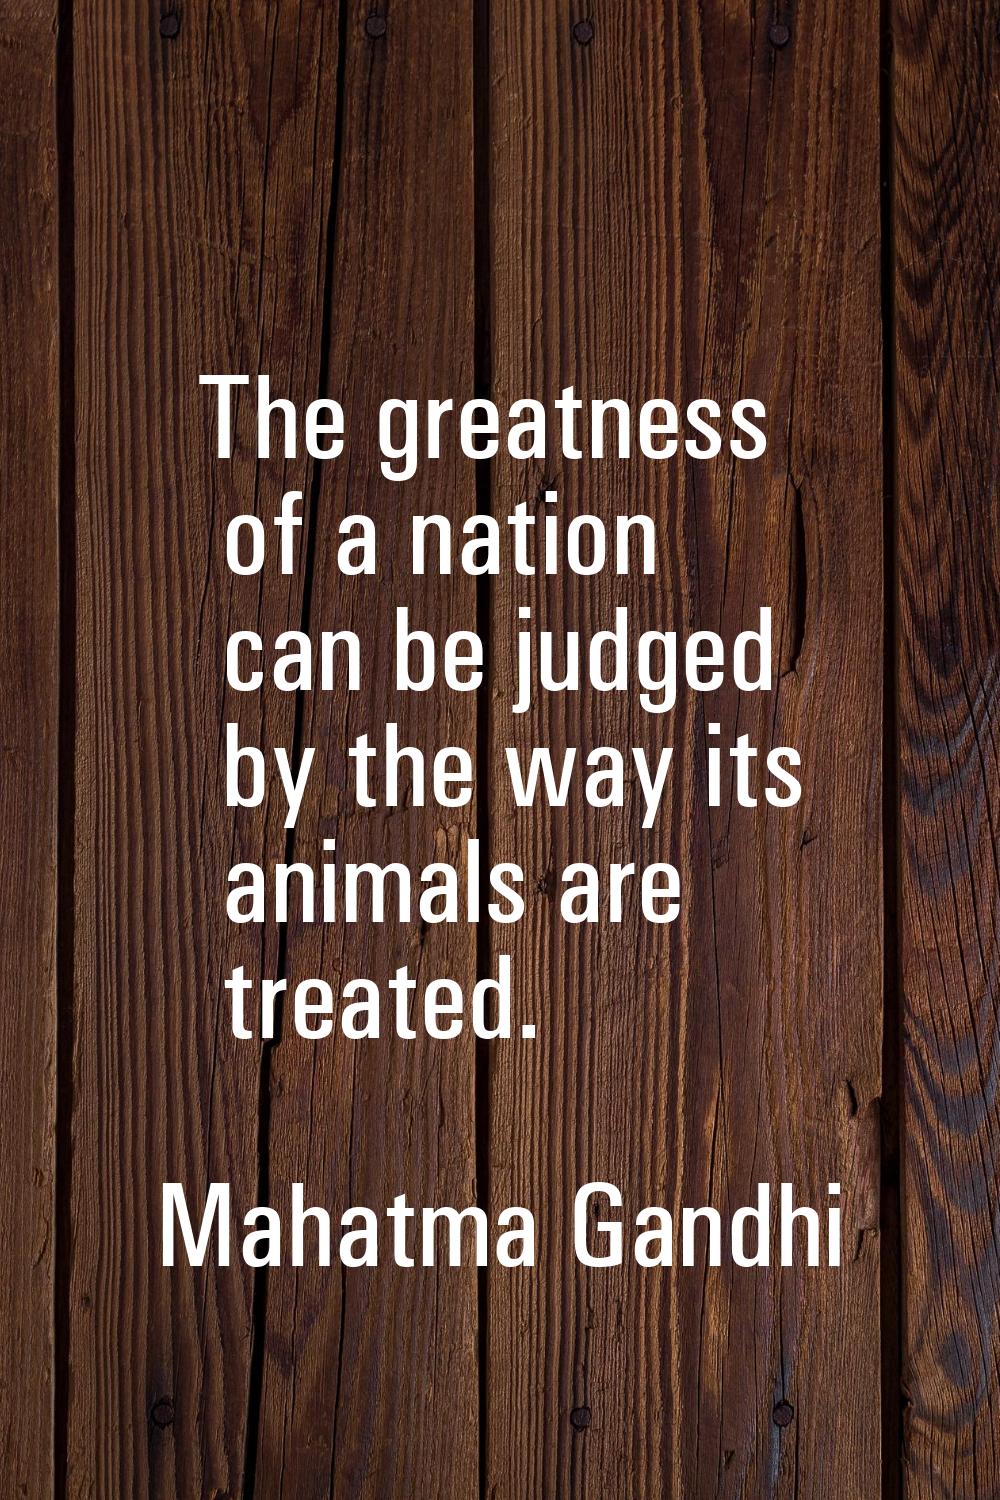 The greatness of a nation can be judged by the way its animals are treated.